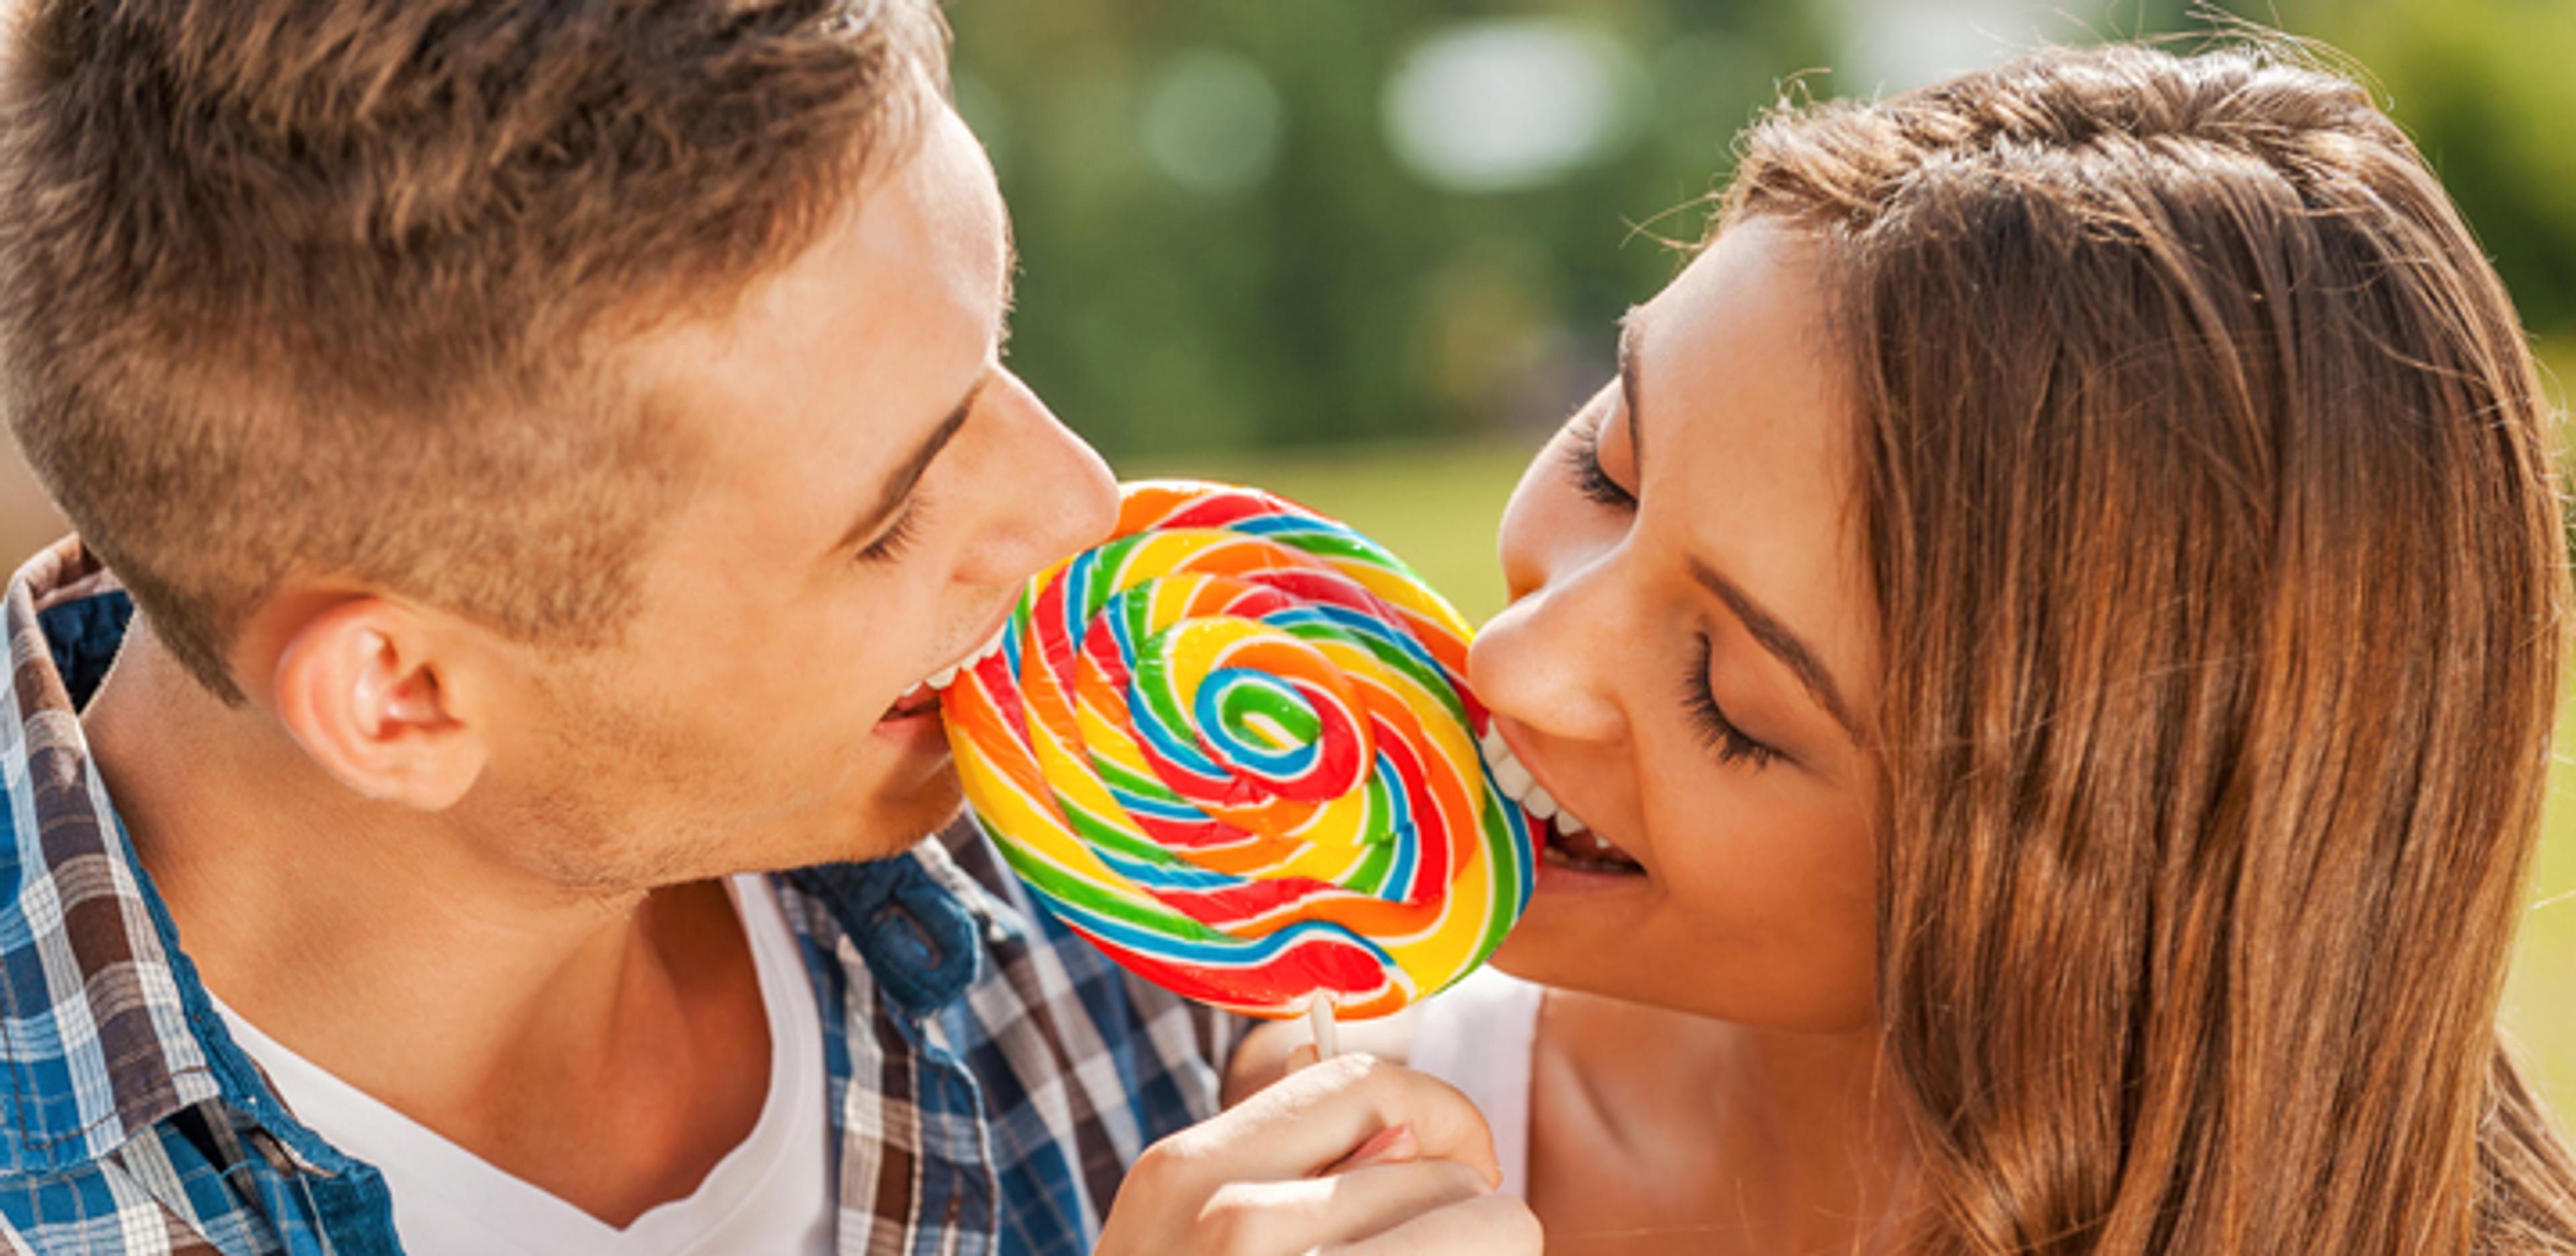 Couple sharing lollypop